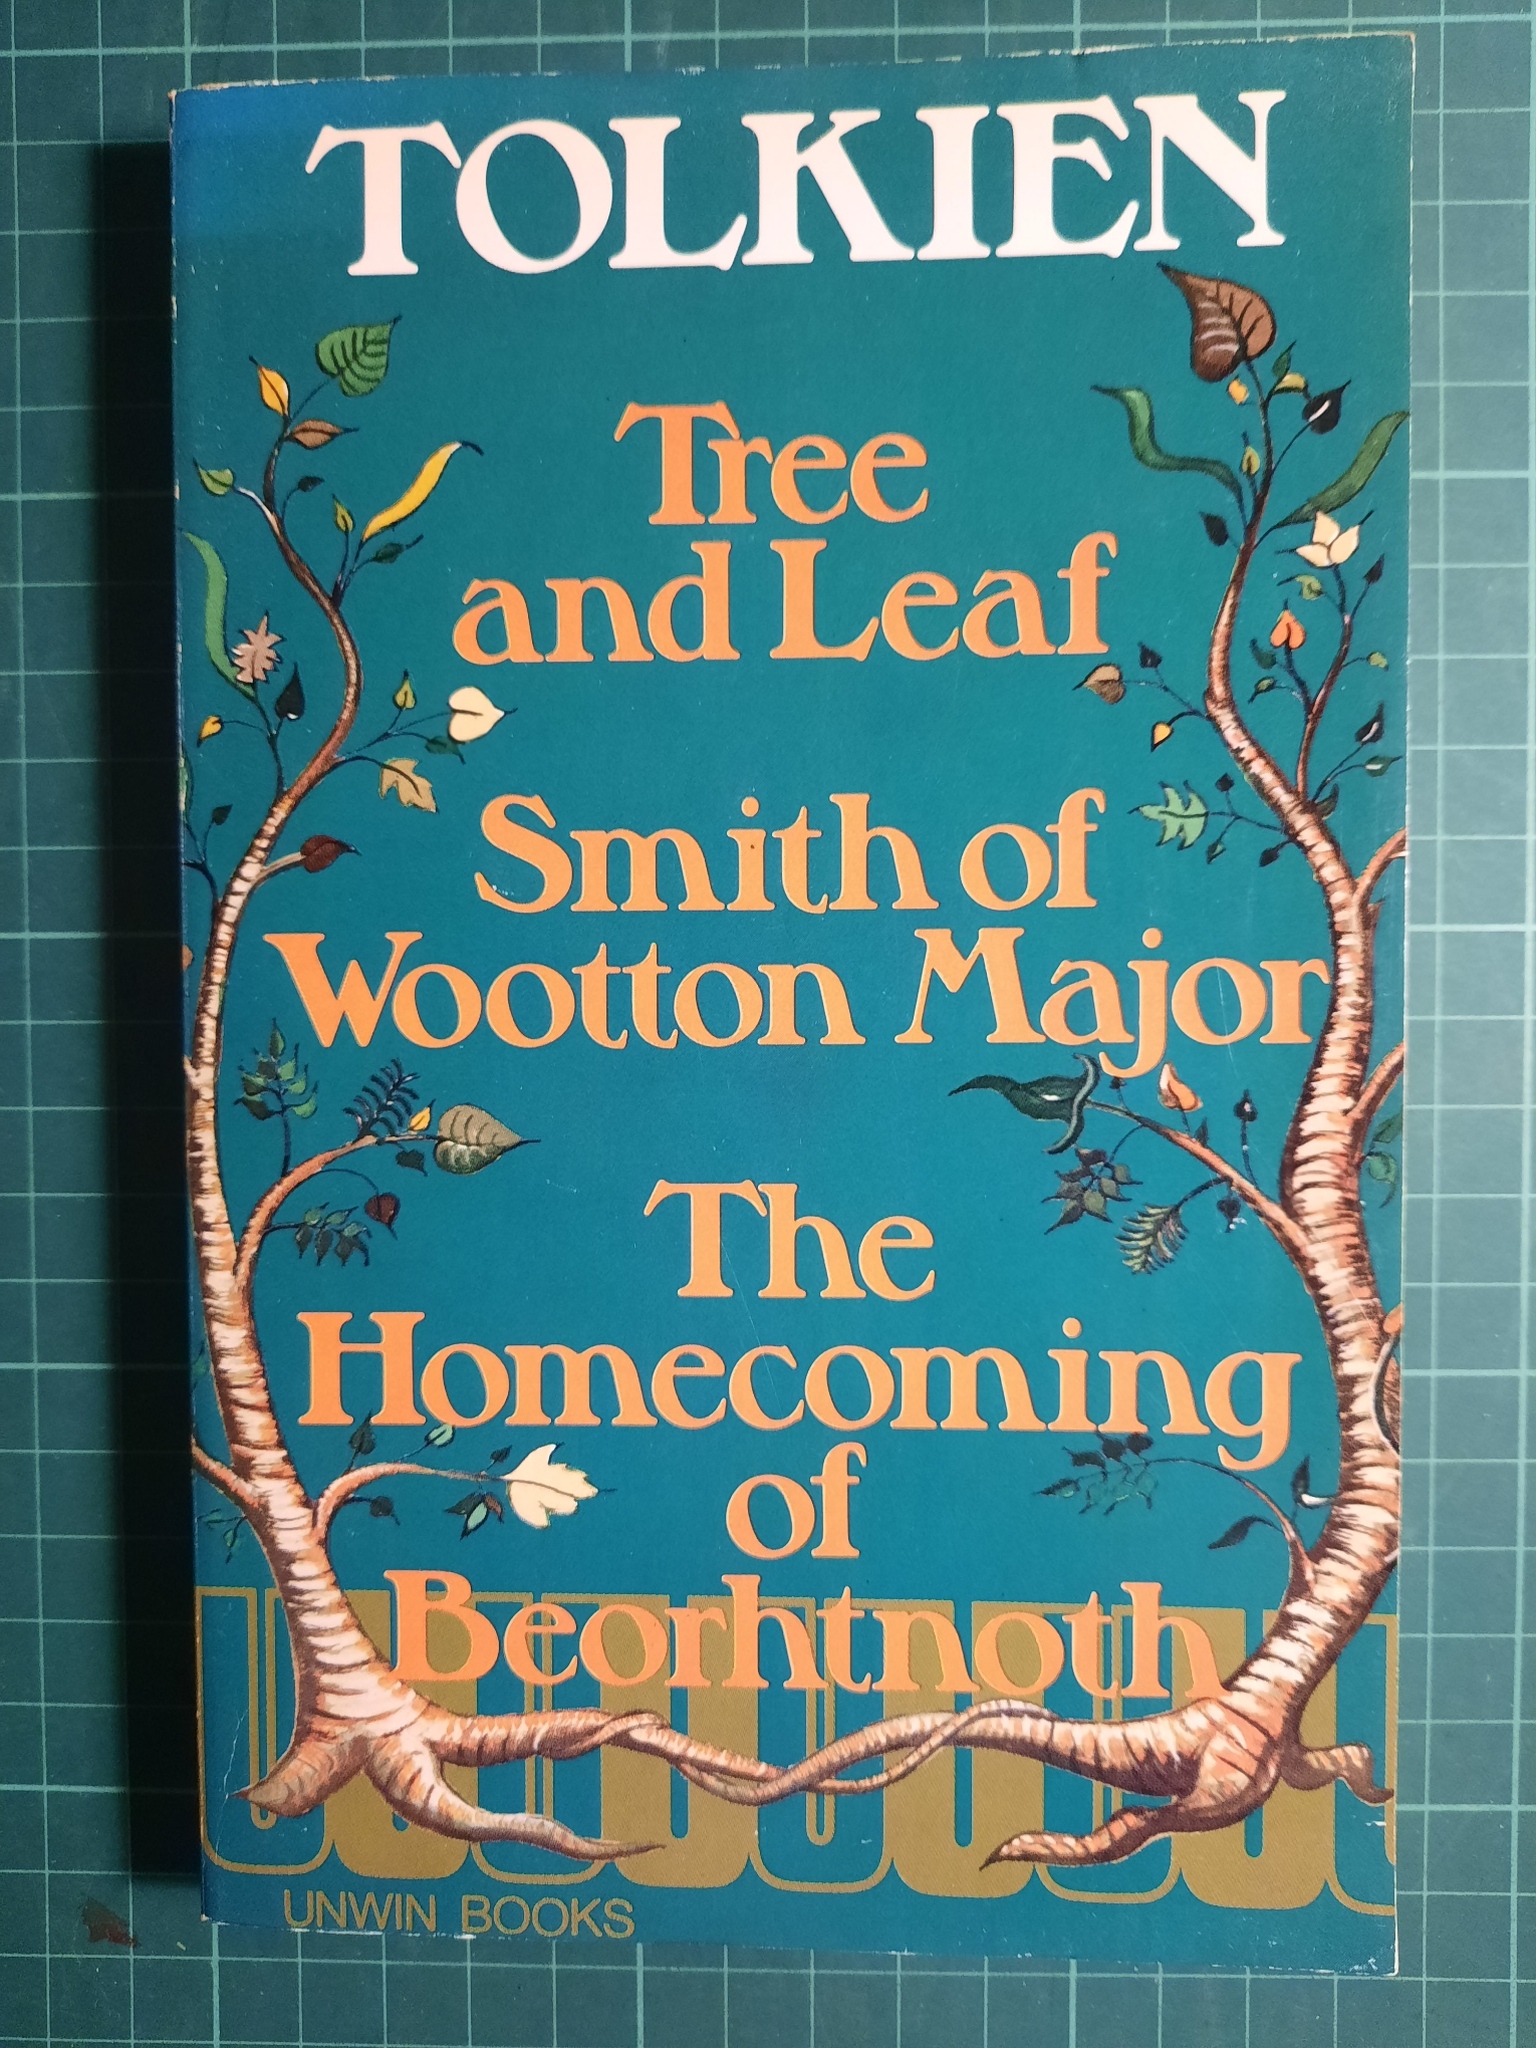 Tree and leaf, Smith of Wooton Major, The homecoming of Beorhtnoth